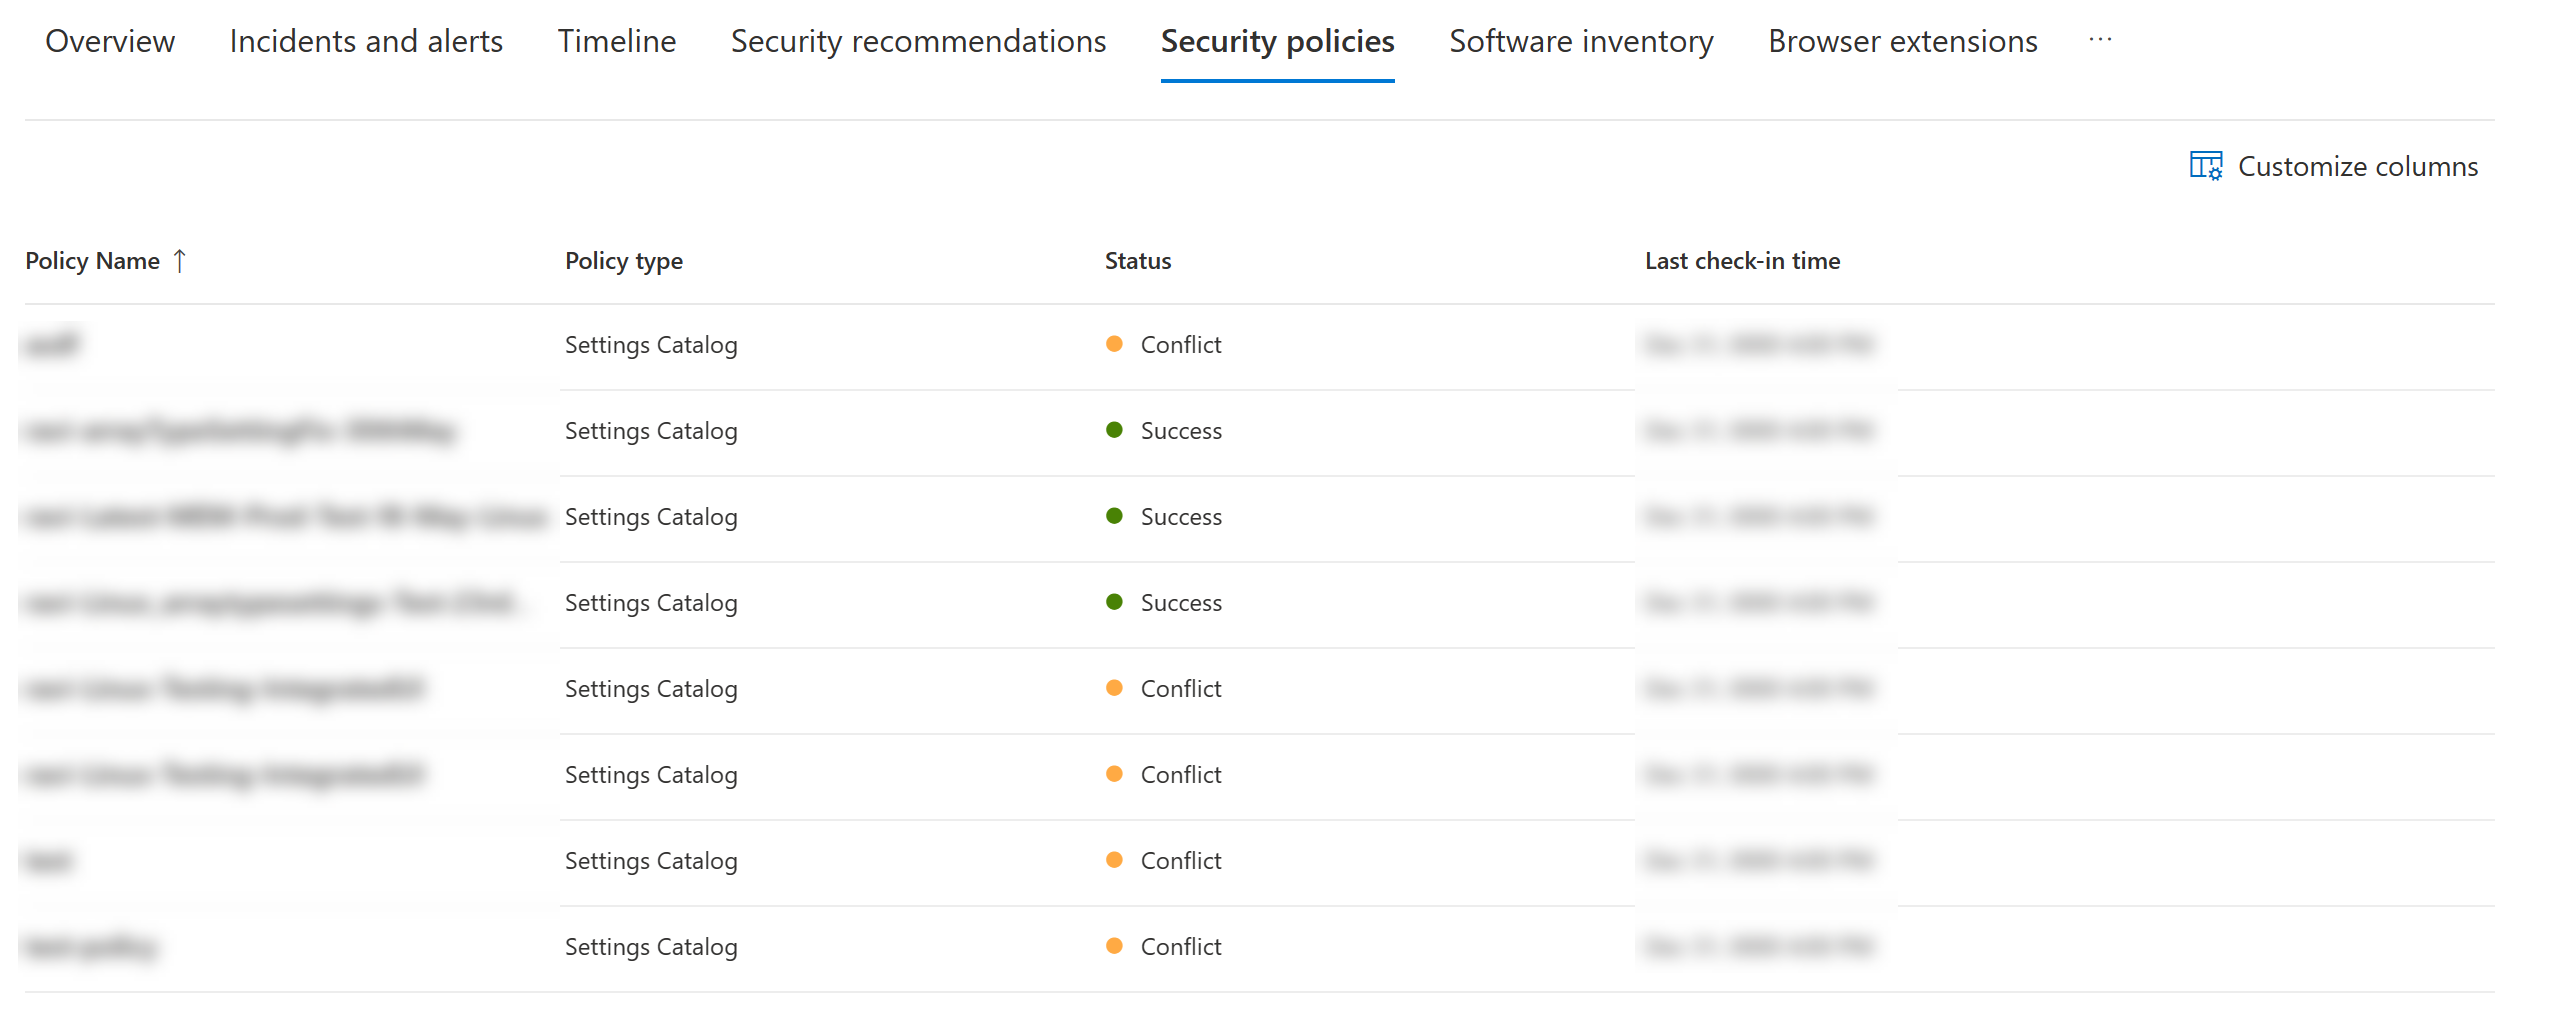 The Security policies tab